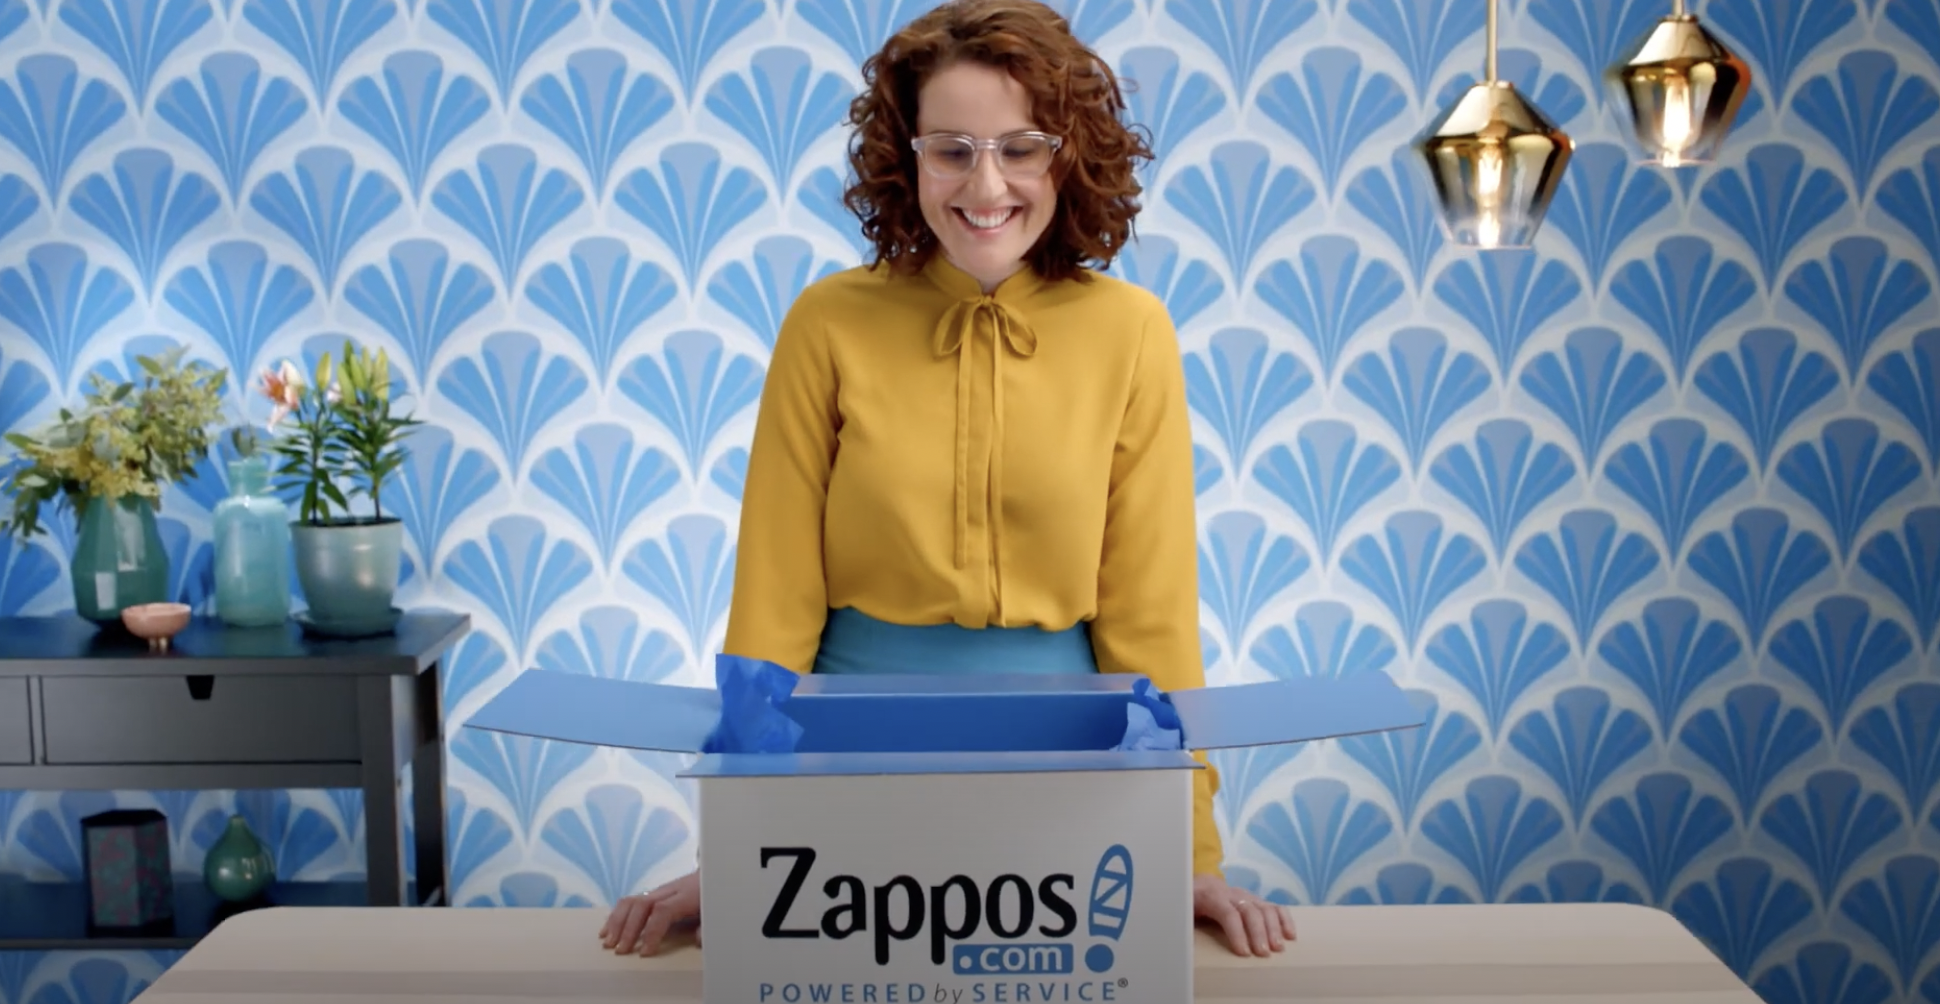 Girl with yellow blouse making zappos unboxing